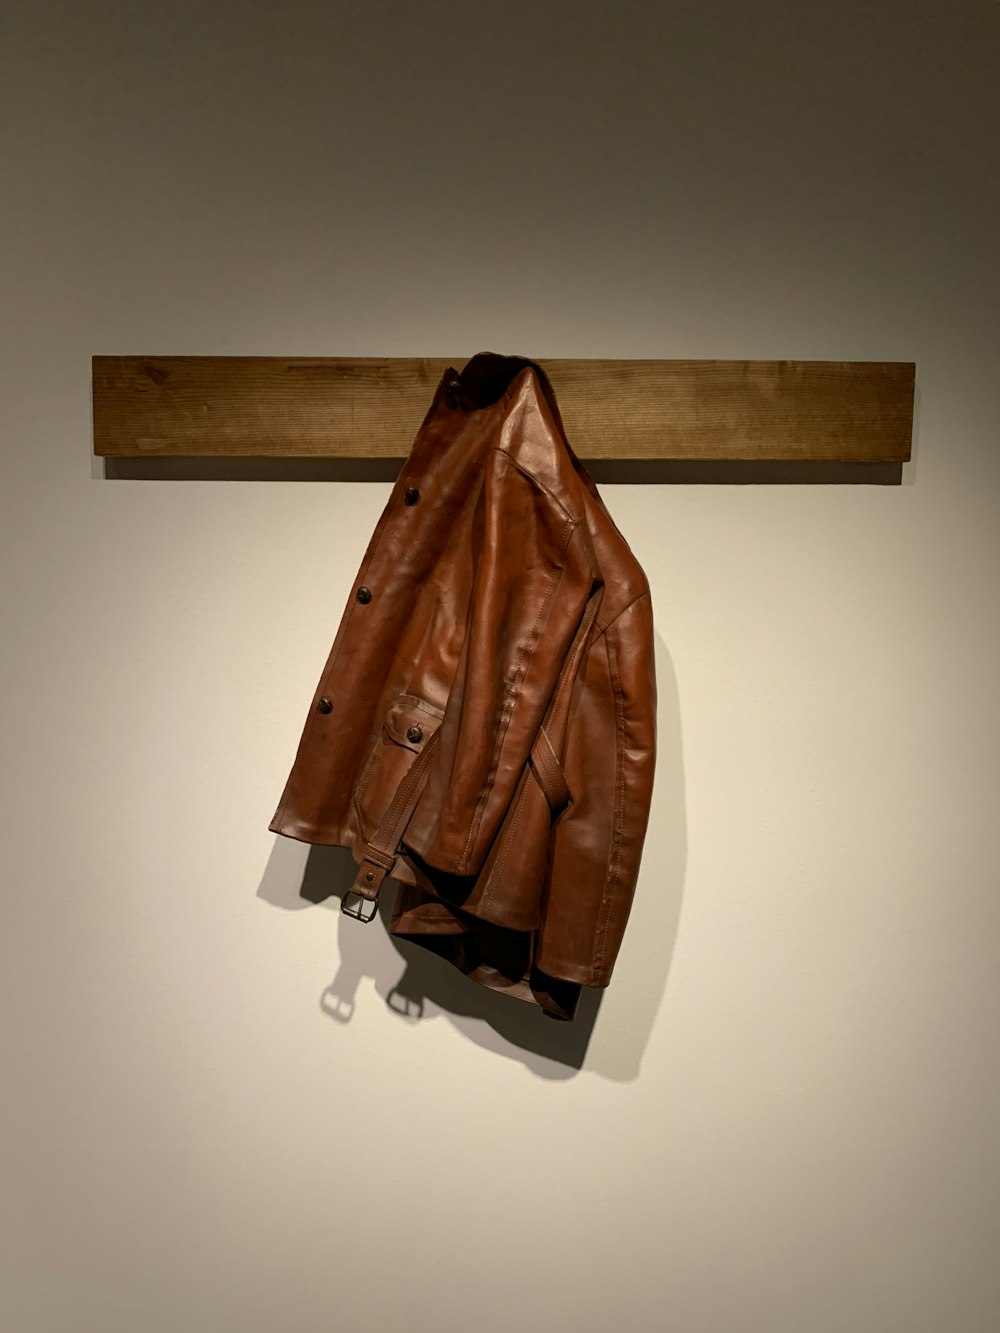 Brown leather jacket hanging on brown wooden wall hook photo – Free Apparel  Image on Unsplash